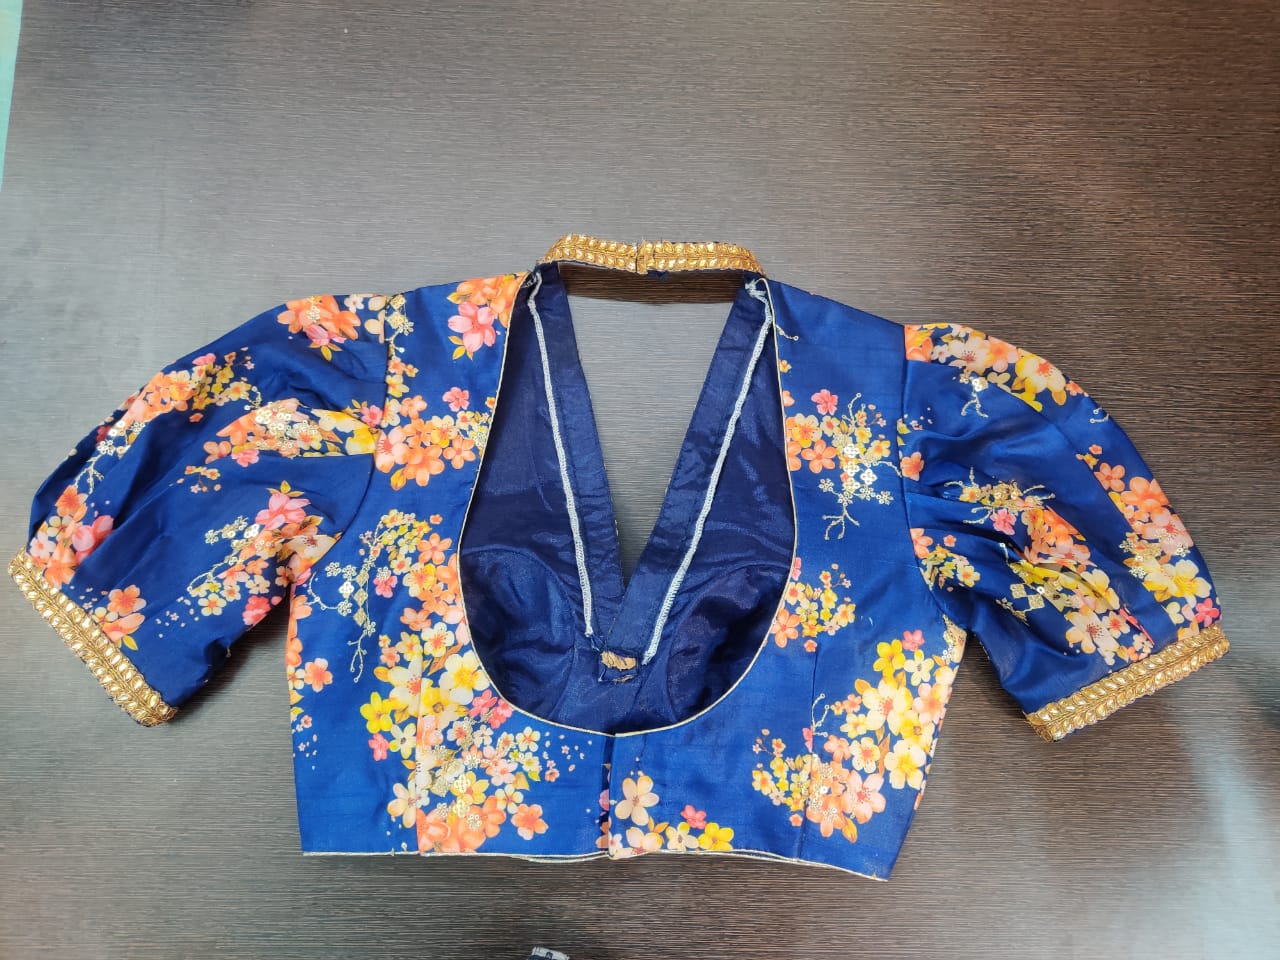 Buy gorgeous indigo blue floral saree blouse online in USA with puff sleeves. Elevate your Indian saree style with exquisite readymade sari blouse, embroidered saree blouses, Banarasi sari blouse, designer saree blouse from Pure Elegance Indian clothing store in USA.-back